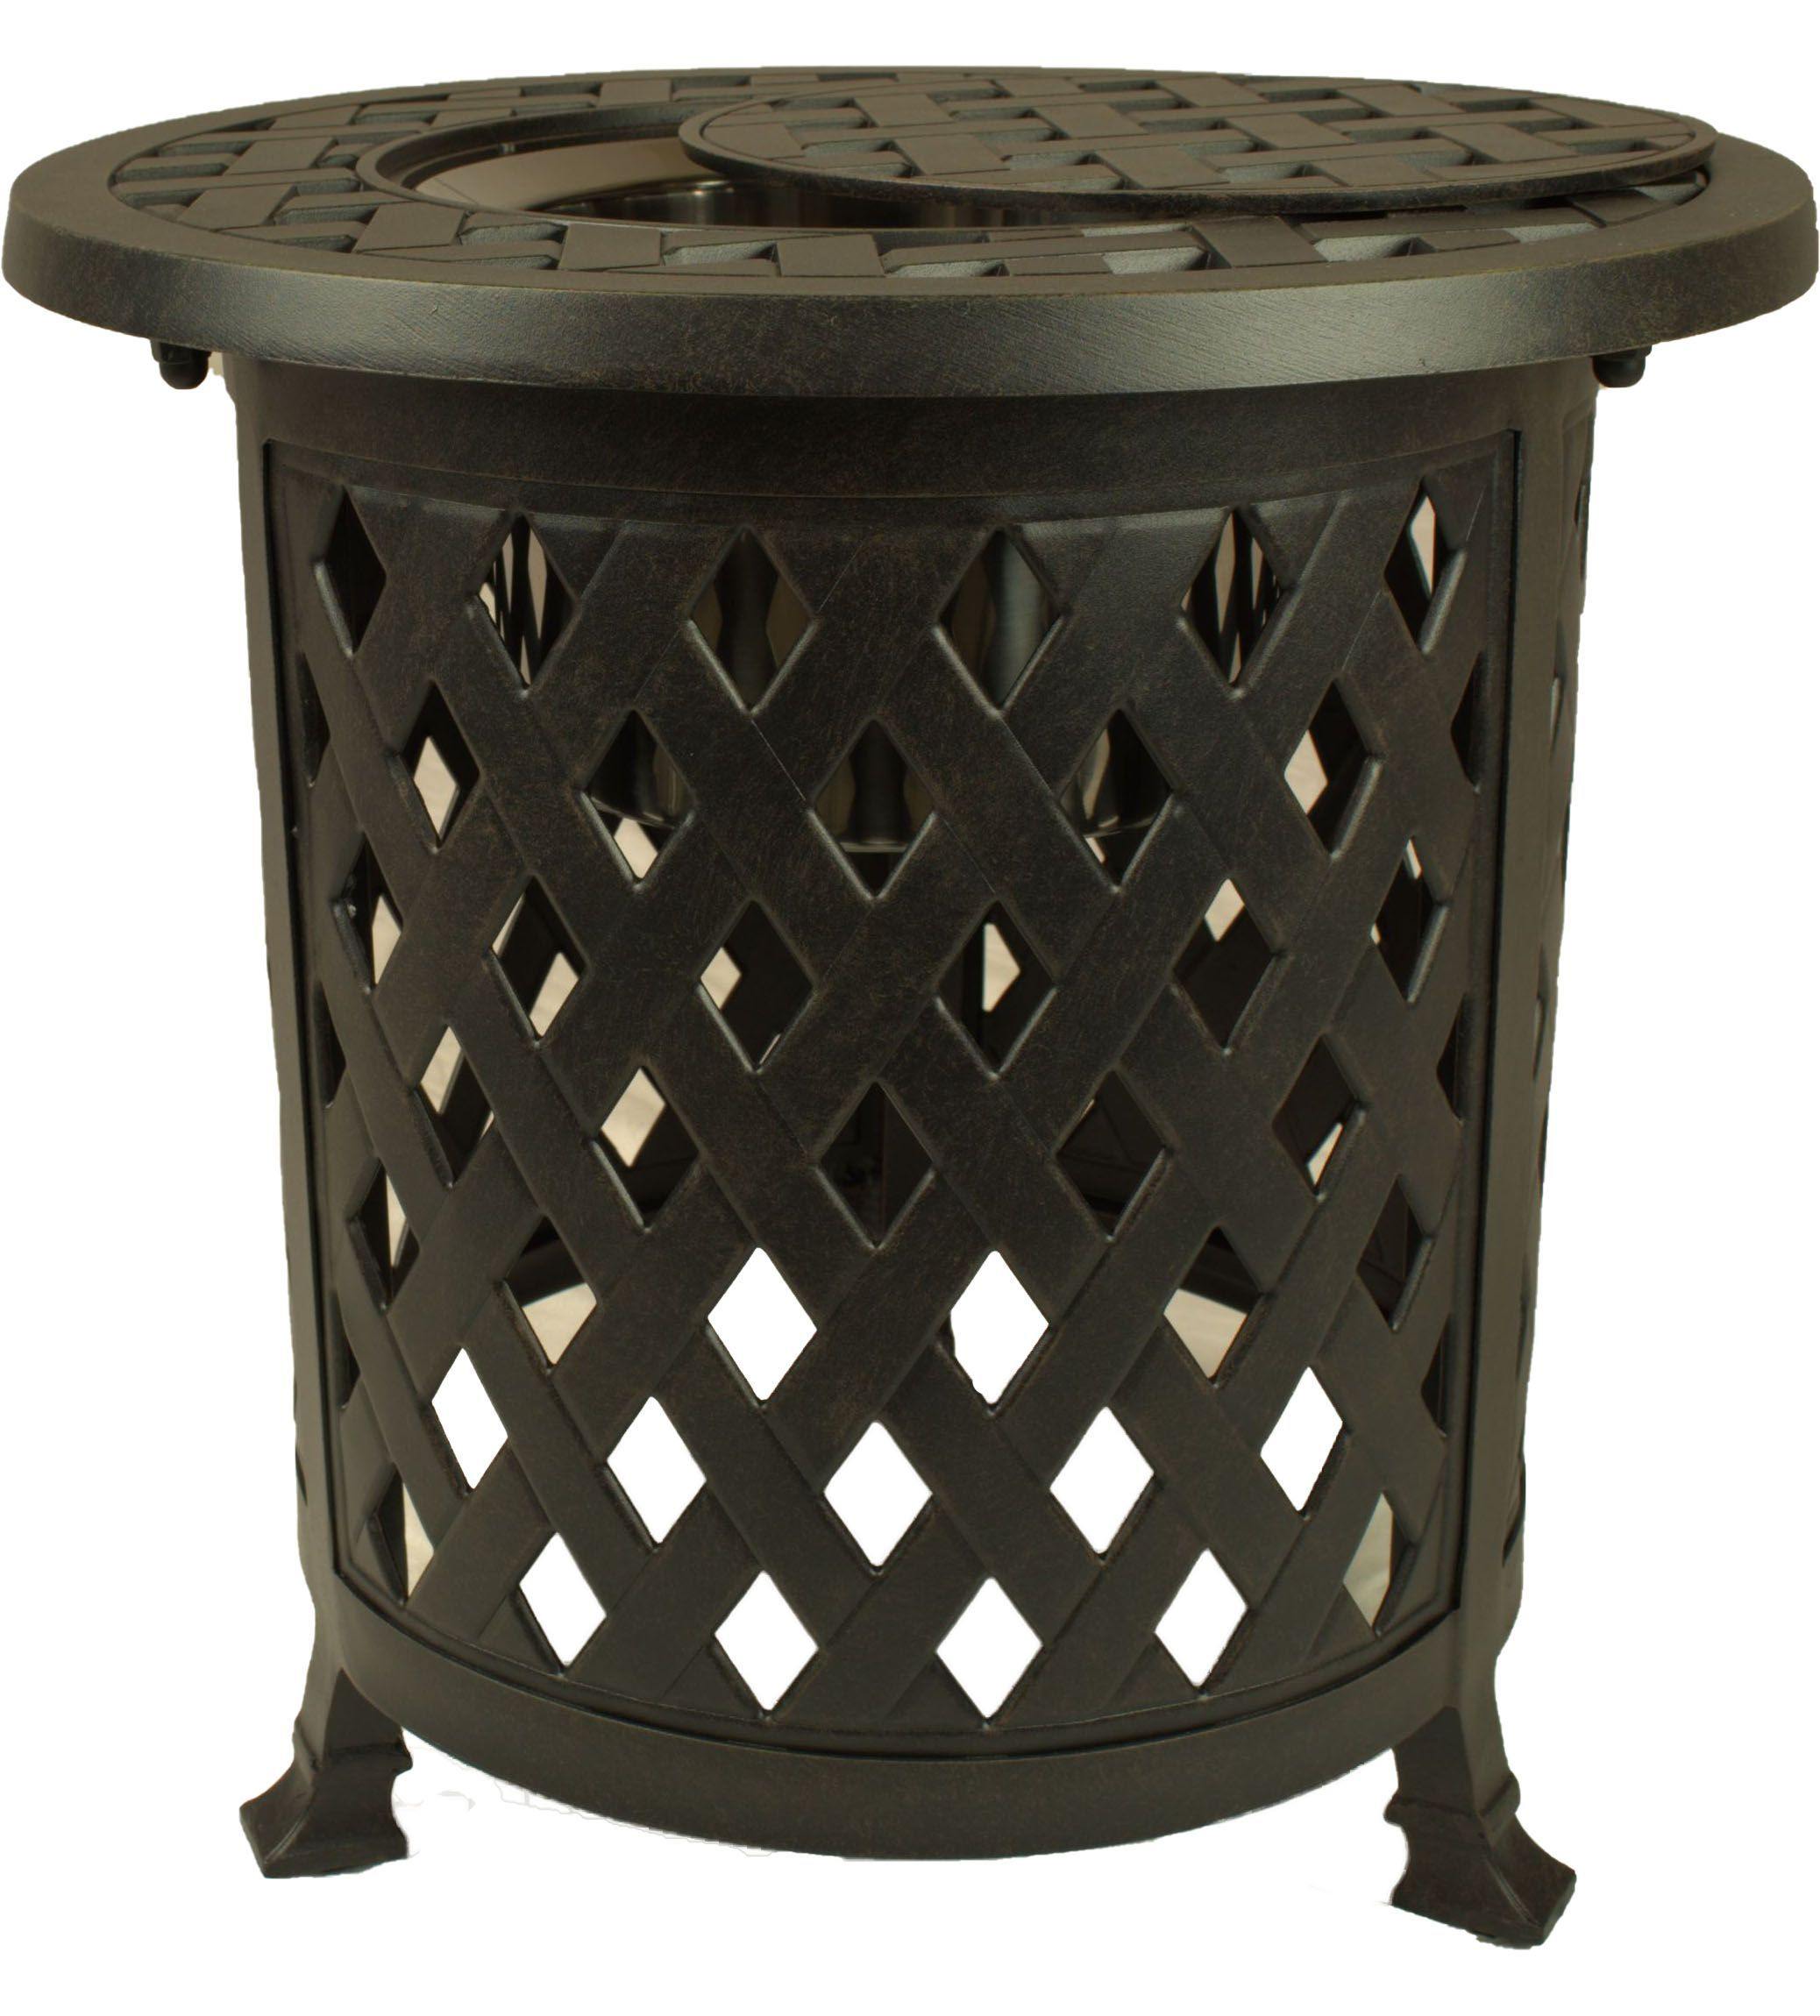 Lawton Casual Comfort Outdoor Dining Table Lawton Casual Comfort - 21" Round Multi-Purpose Accent Table Weave  (W/ Ice Bucket Included)